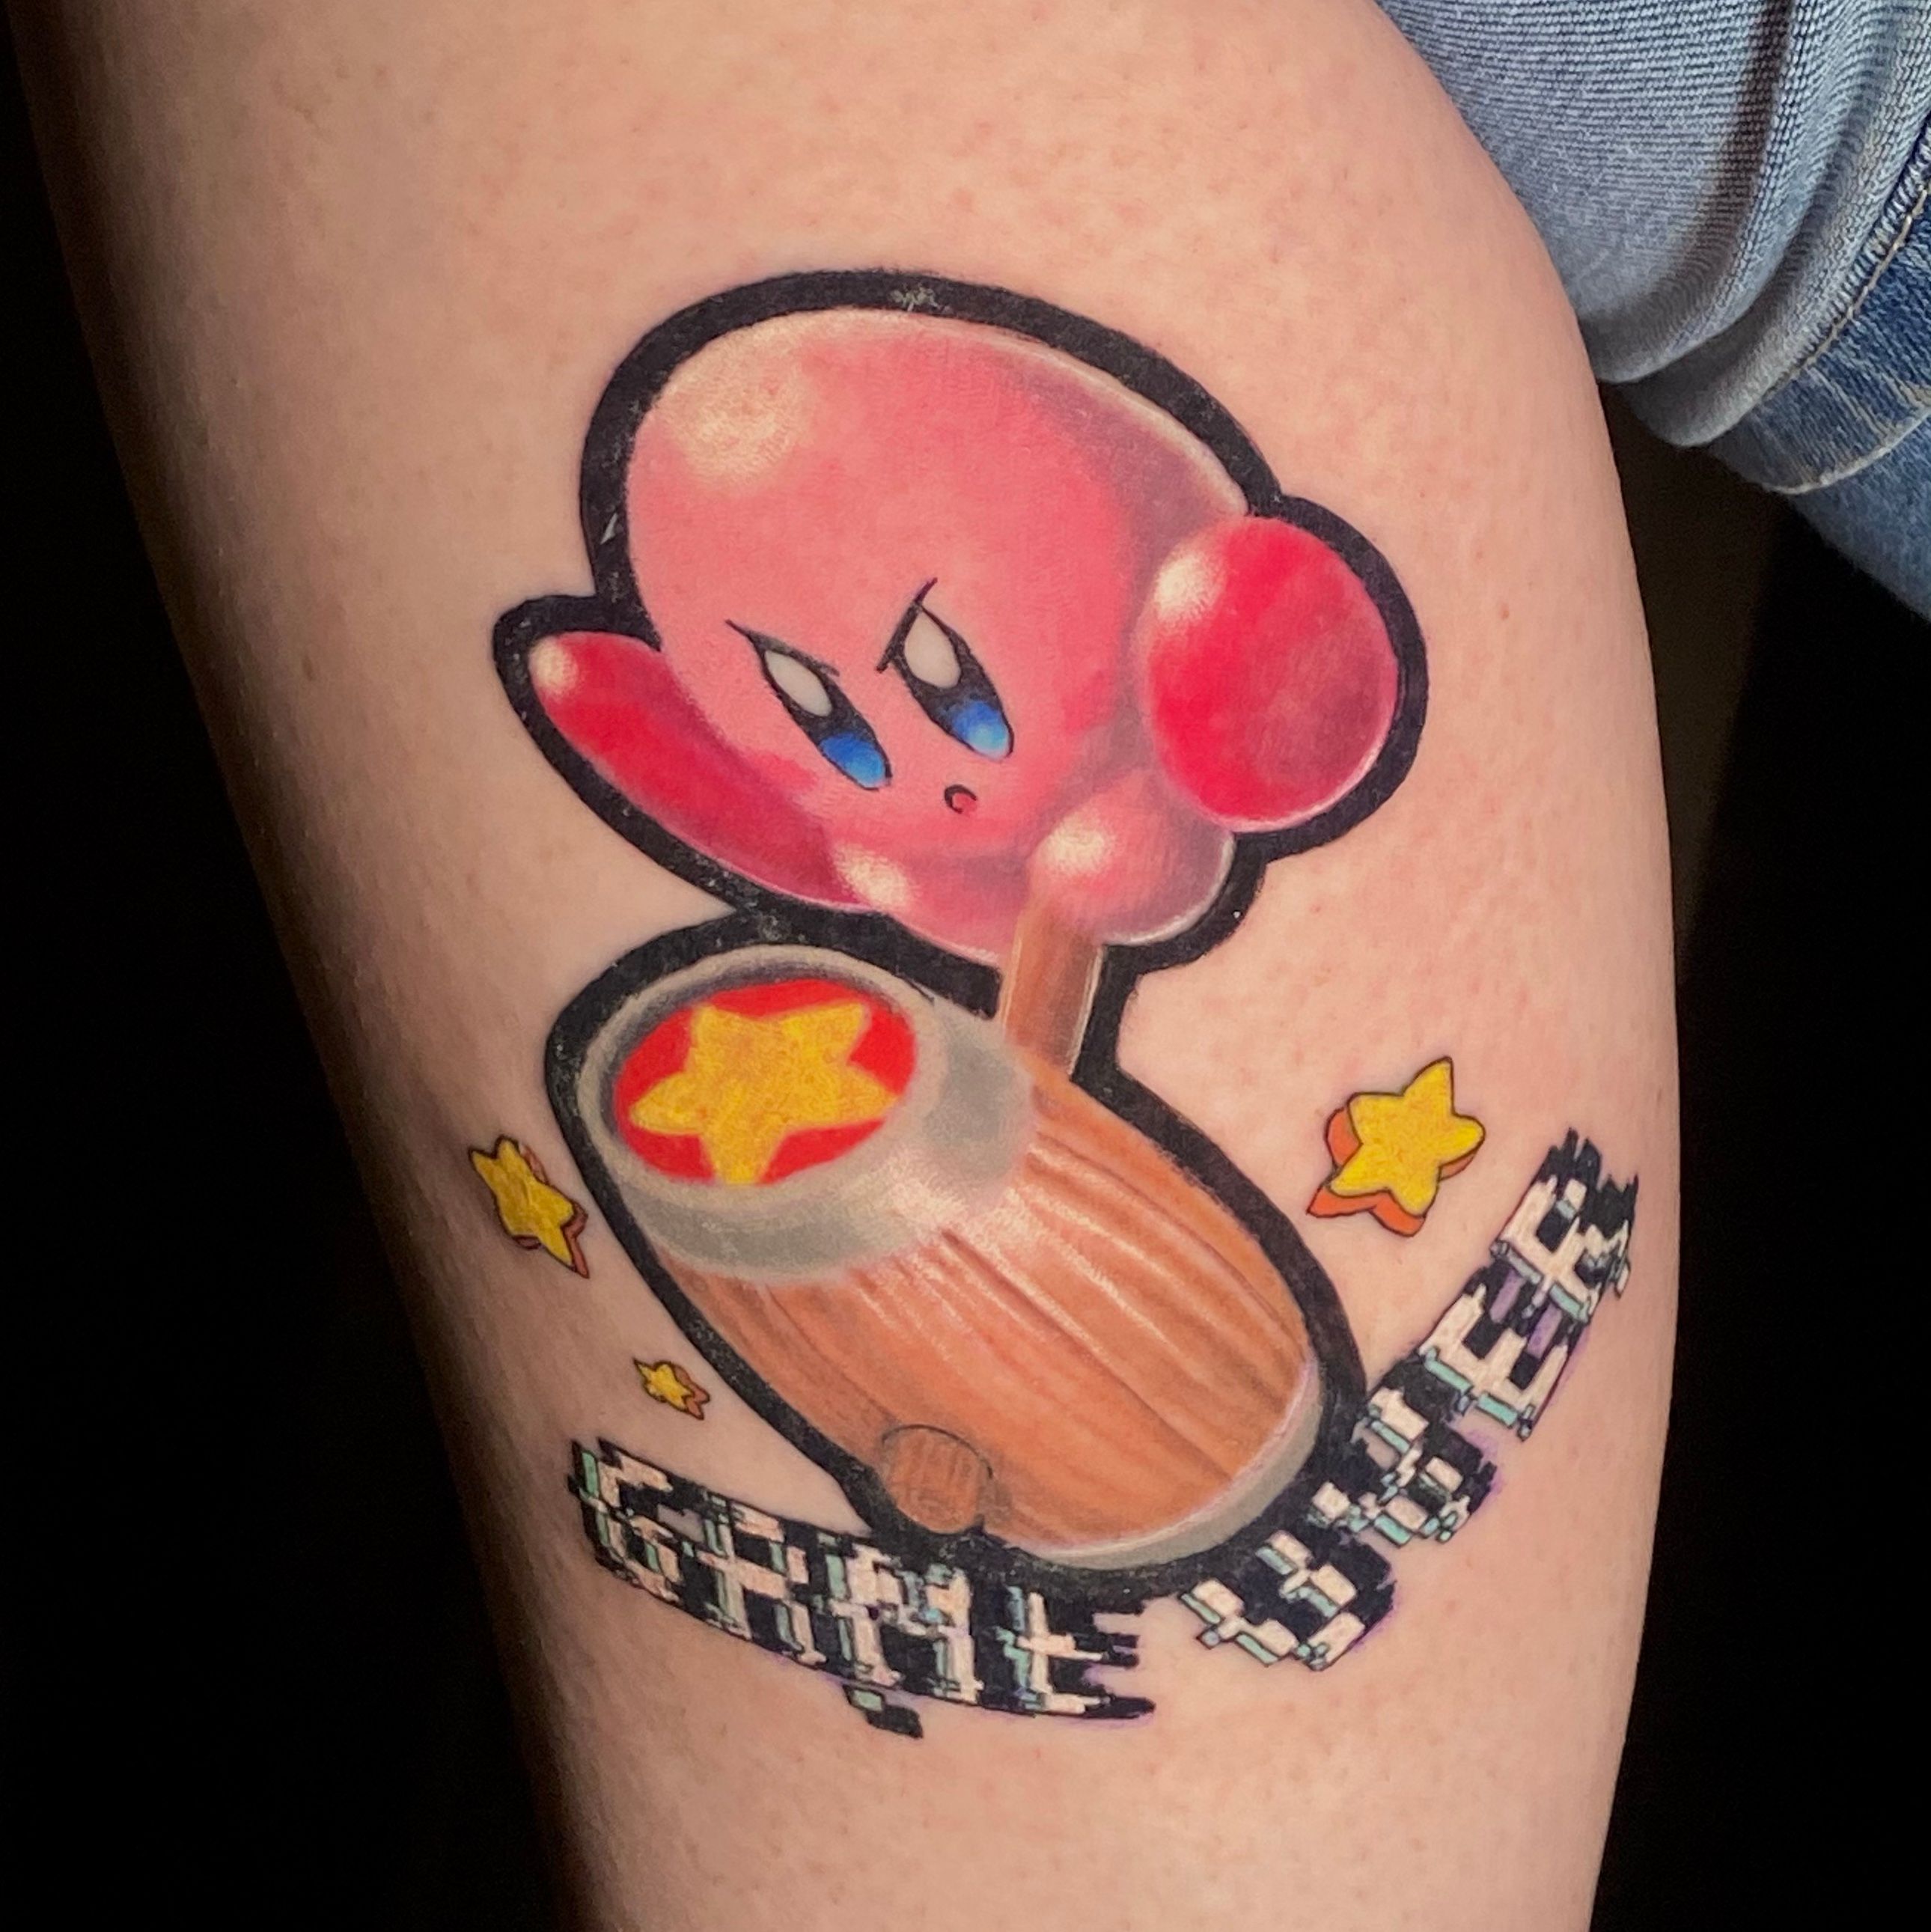 Best Video Game Tattoo Ideas in 2022  Freehand